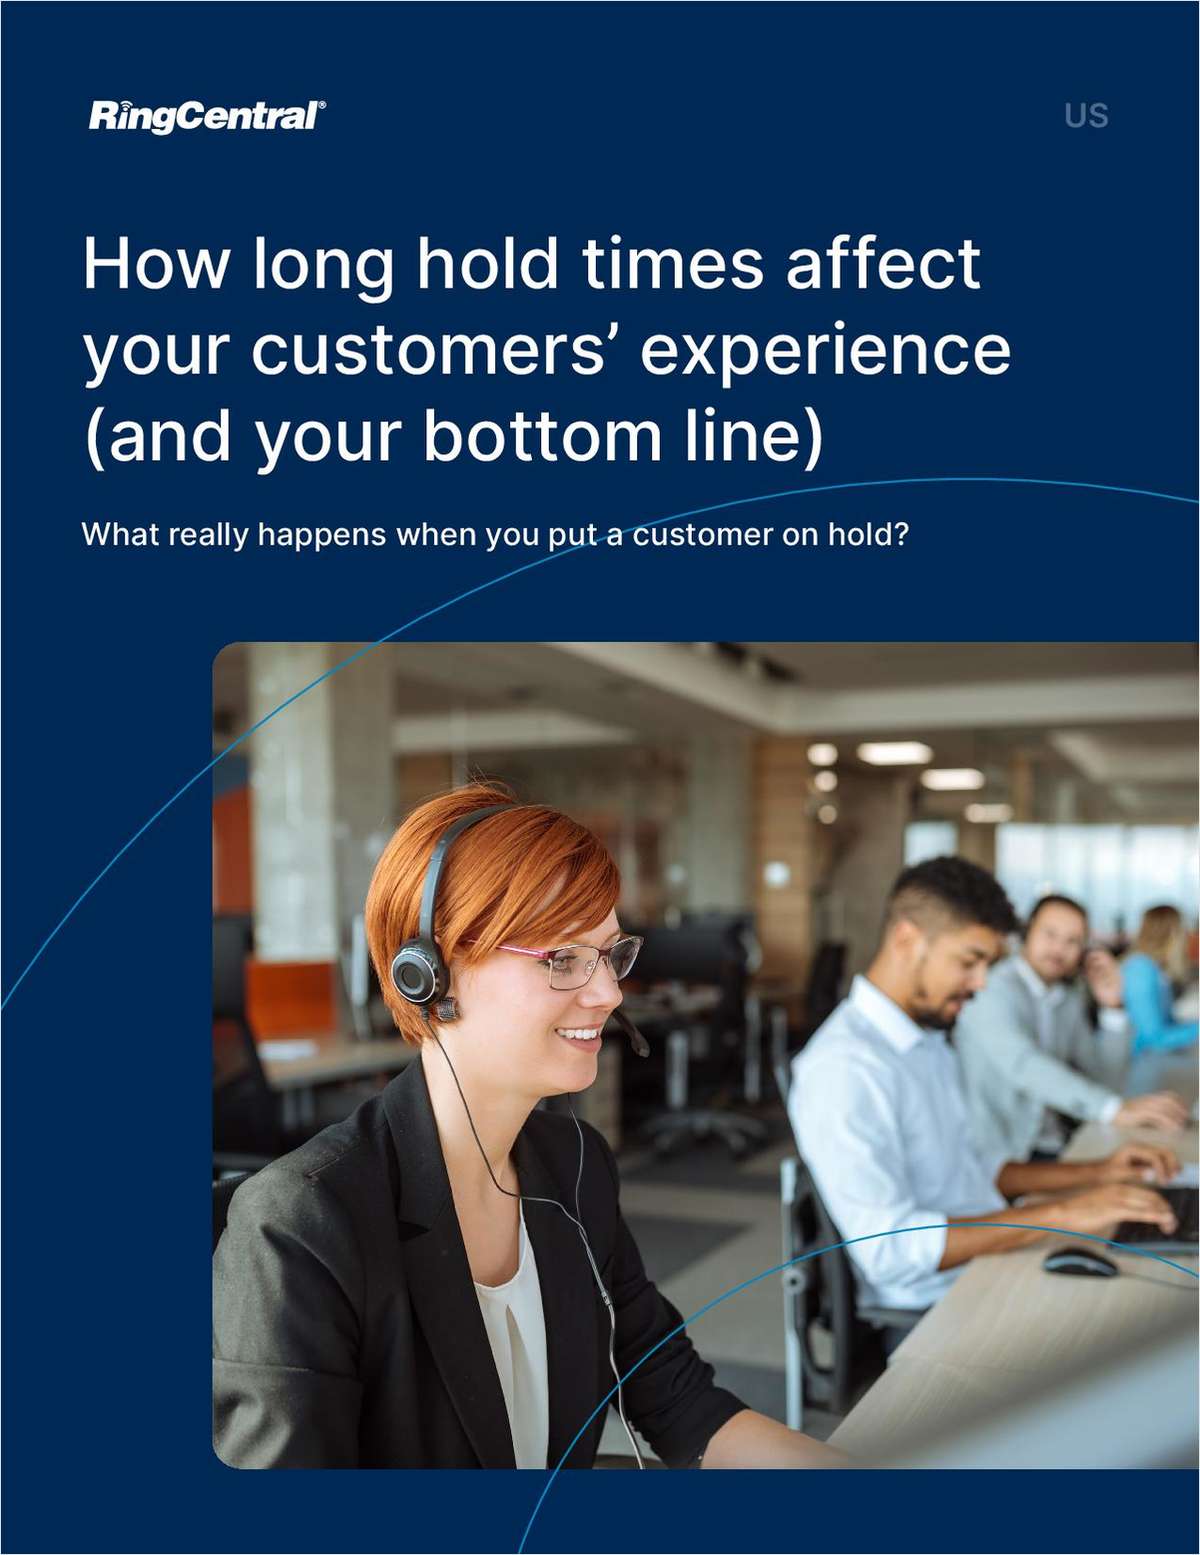 How long hold times affect your customer experience